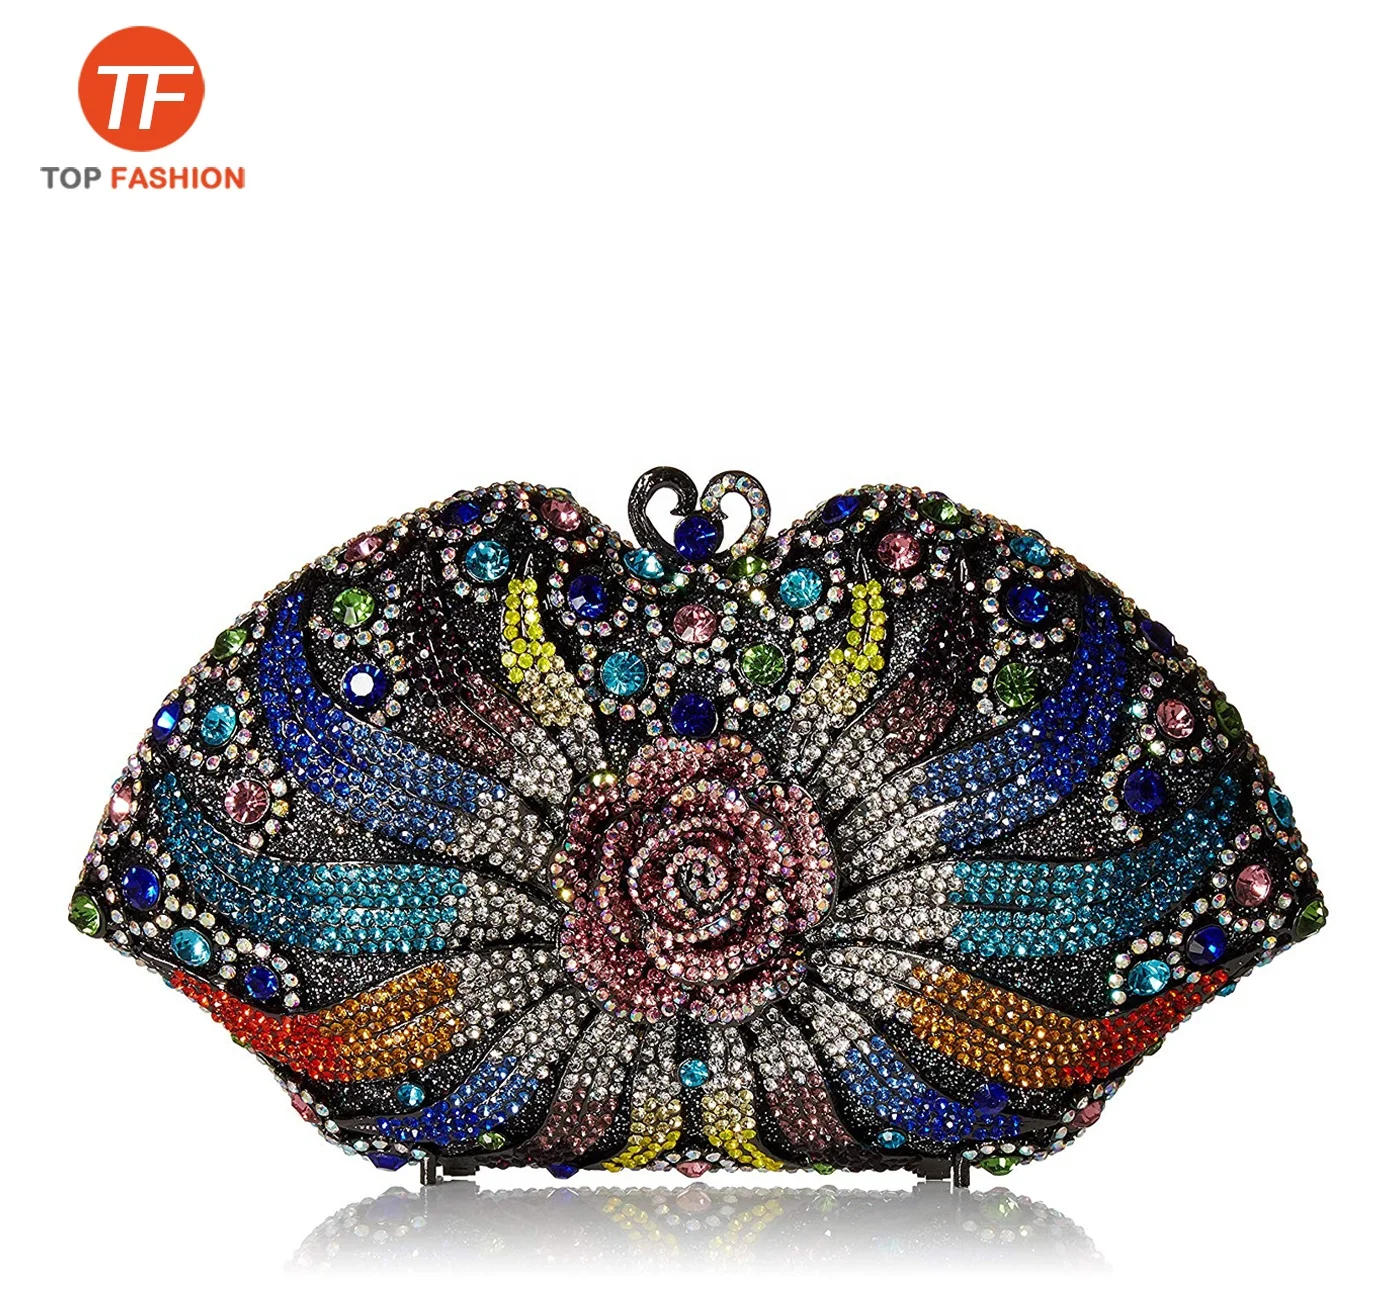 

Expensive Crystal Rhinestone Clutch Purse Women Flower Evening Bag for Formal Party Wholesales from China Supplier, ( accept customized )